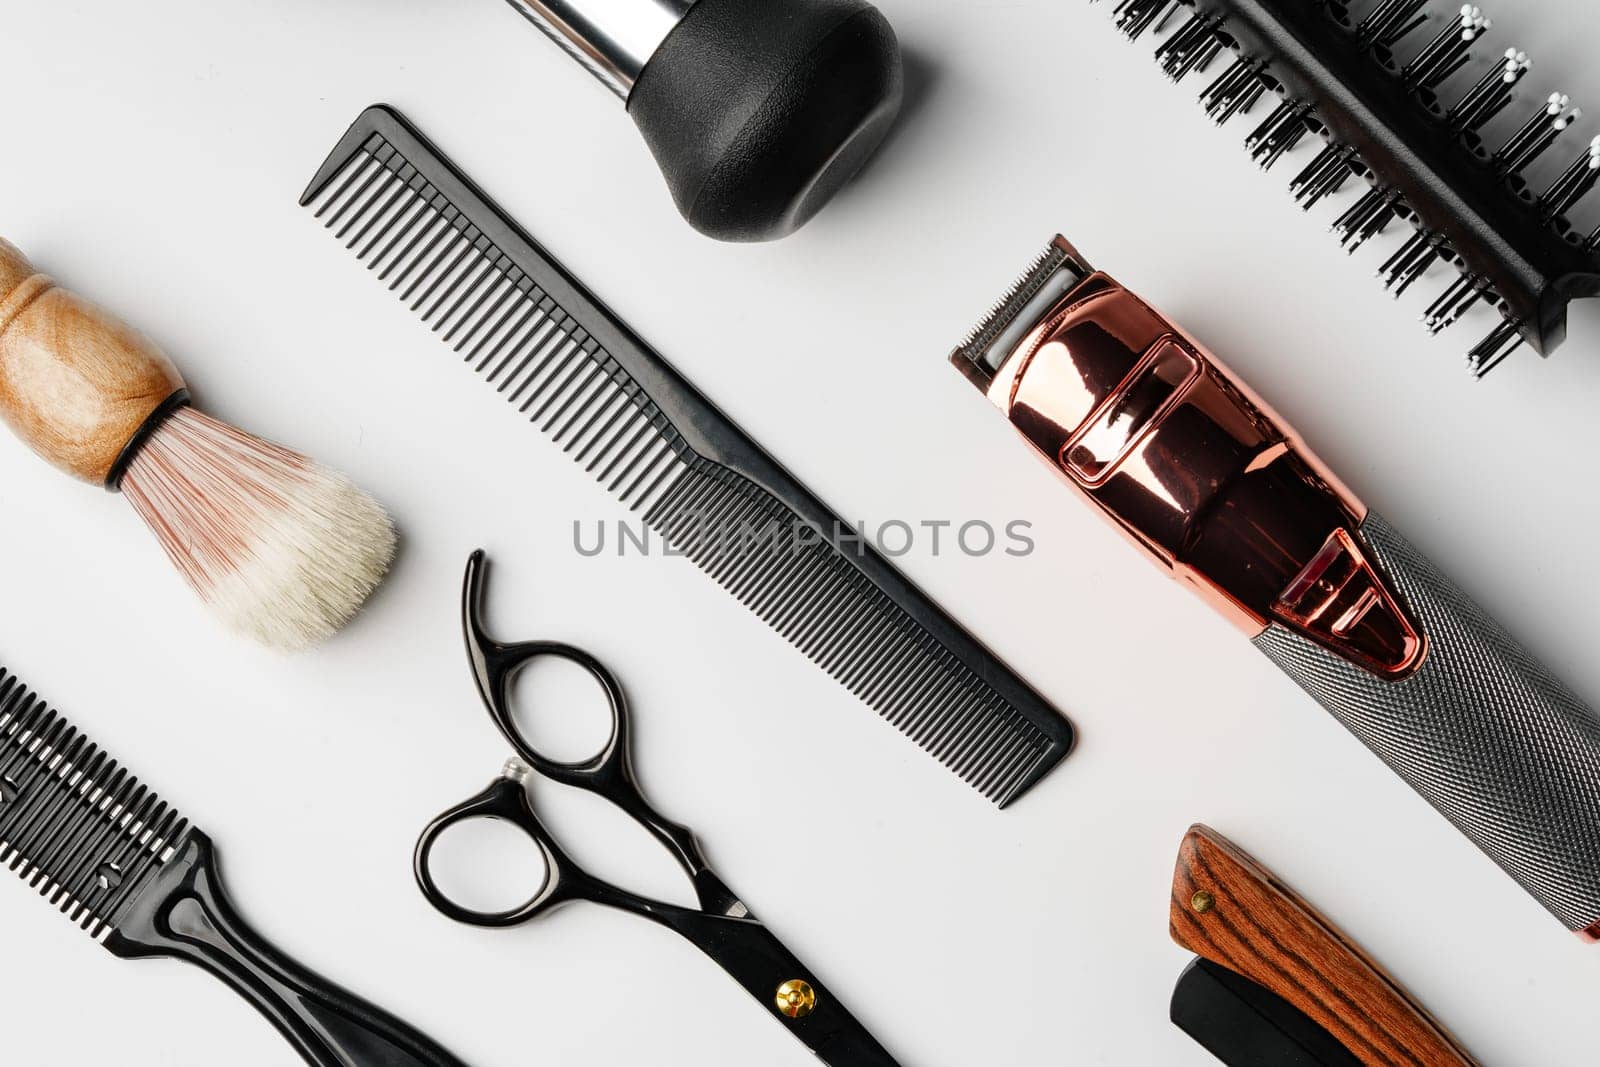 Pattern of various shaving and bauty care accessories for men on gray background by Fabrikasimf